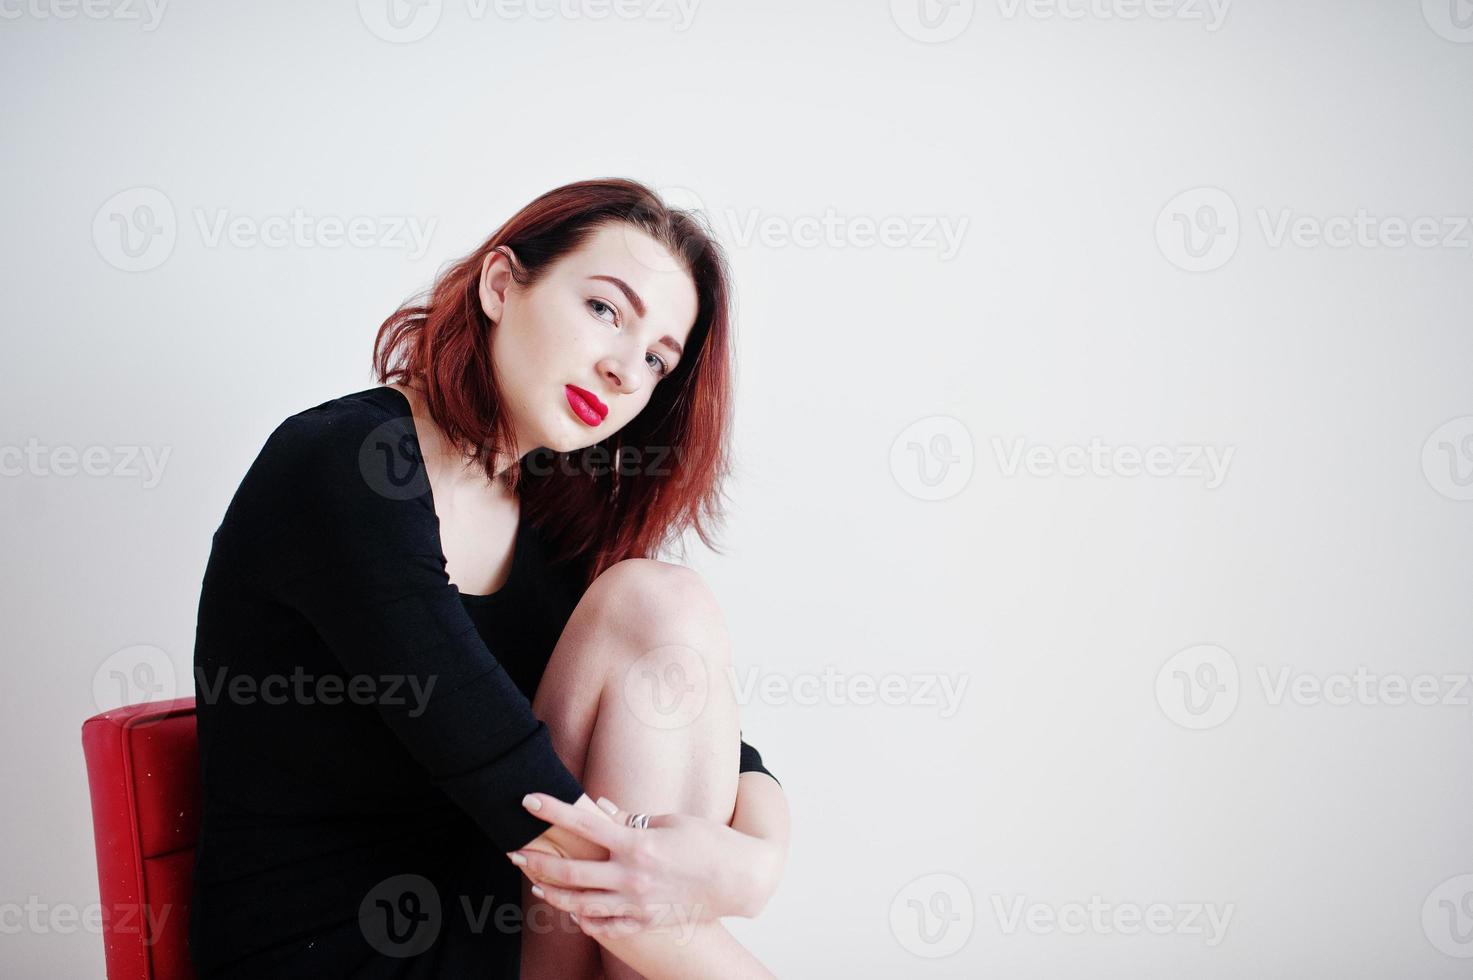 Red haired girl on black dress tunic sitting on red chair against white wall at empty room. photo